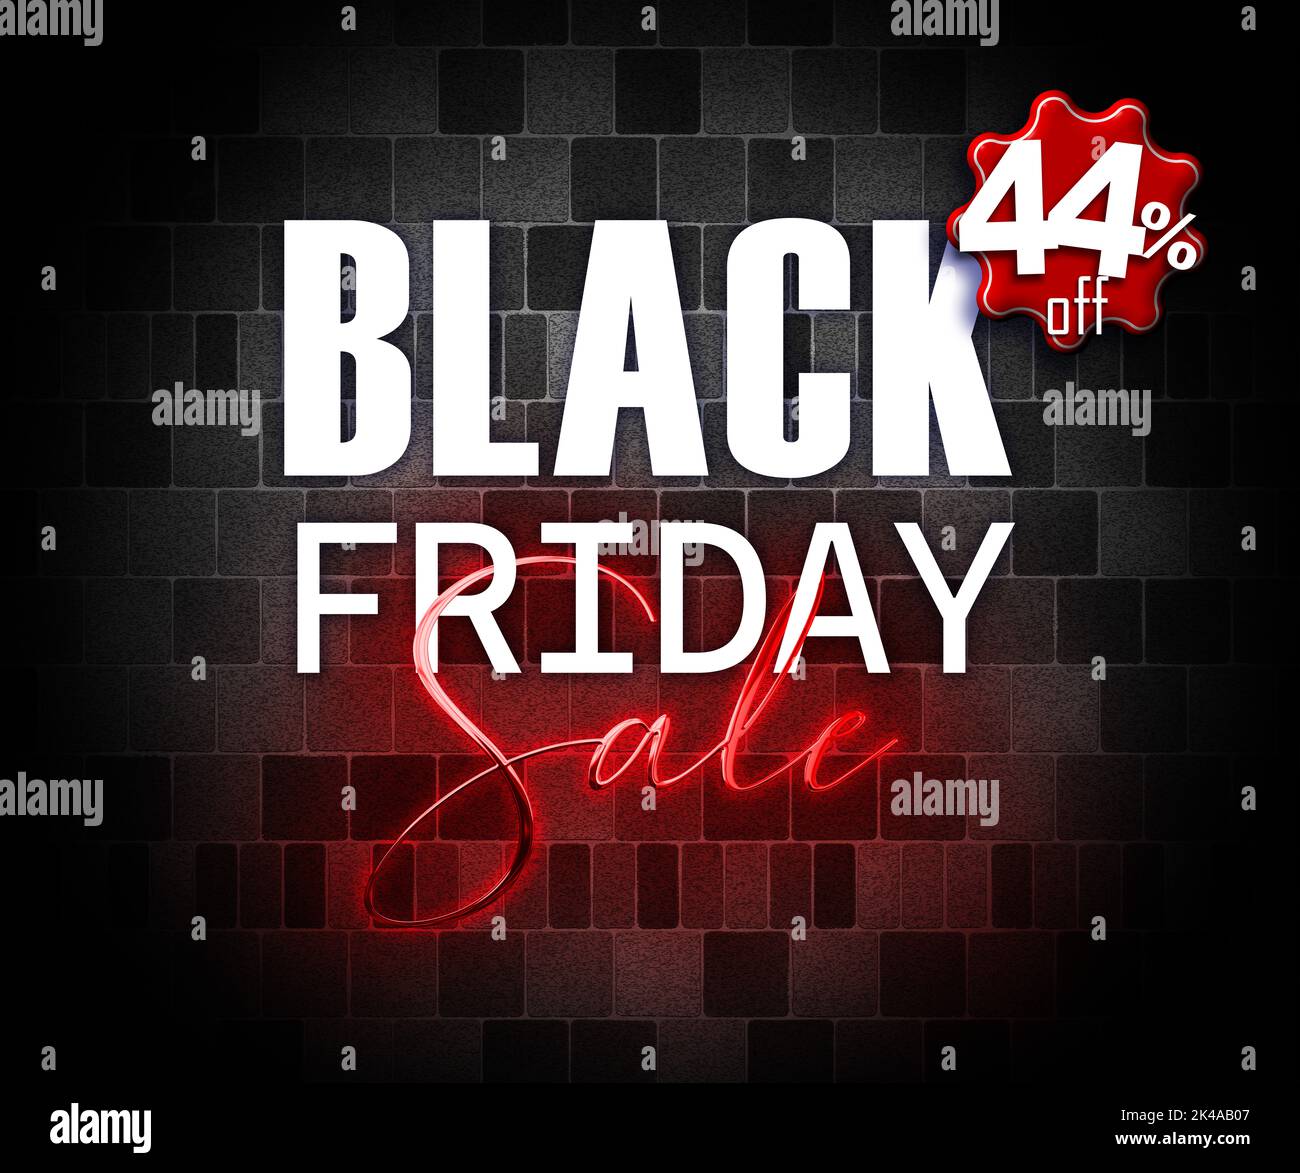 illustration with 3d elements black friday promotion banner 44 percent off sales increase Stock Photo